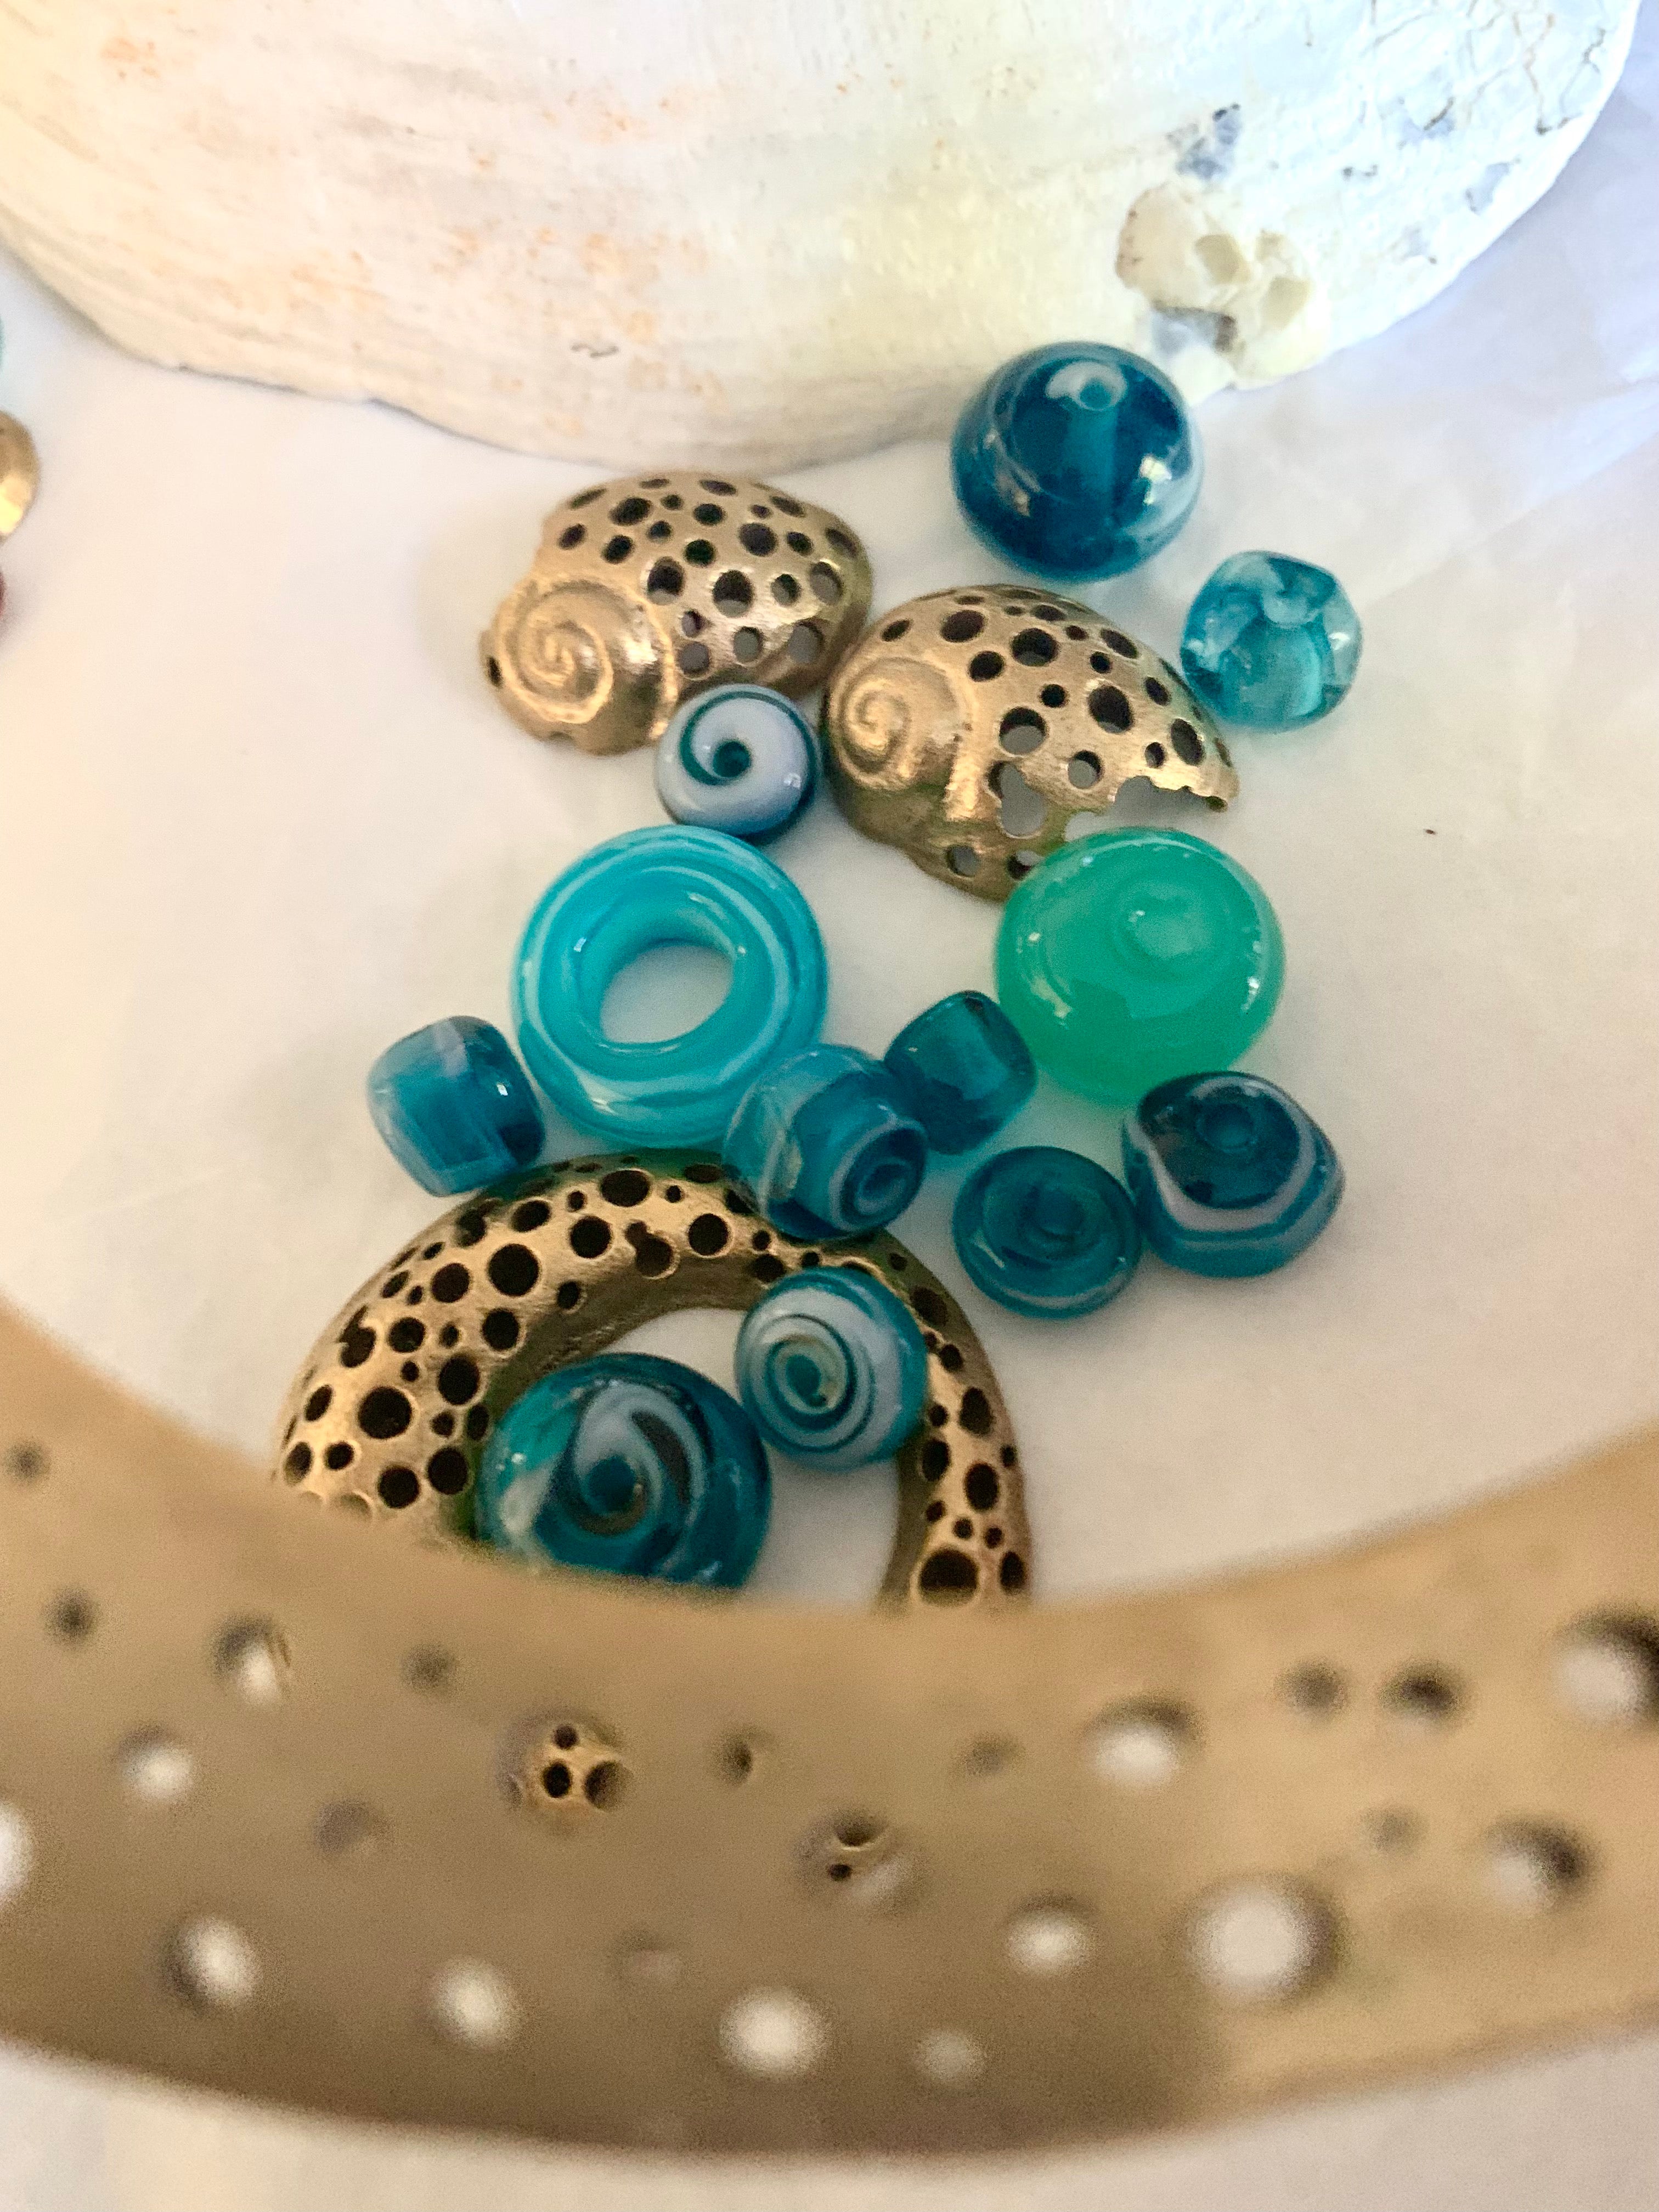 Bronze artisan made pieces with blue glass beads